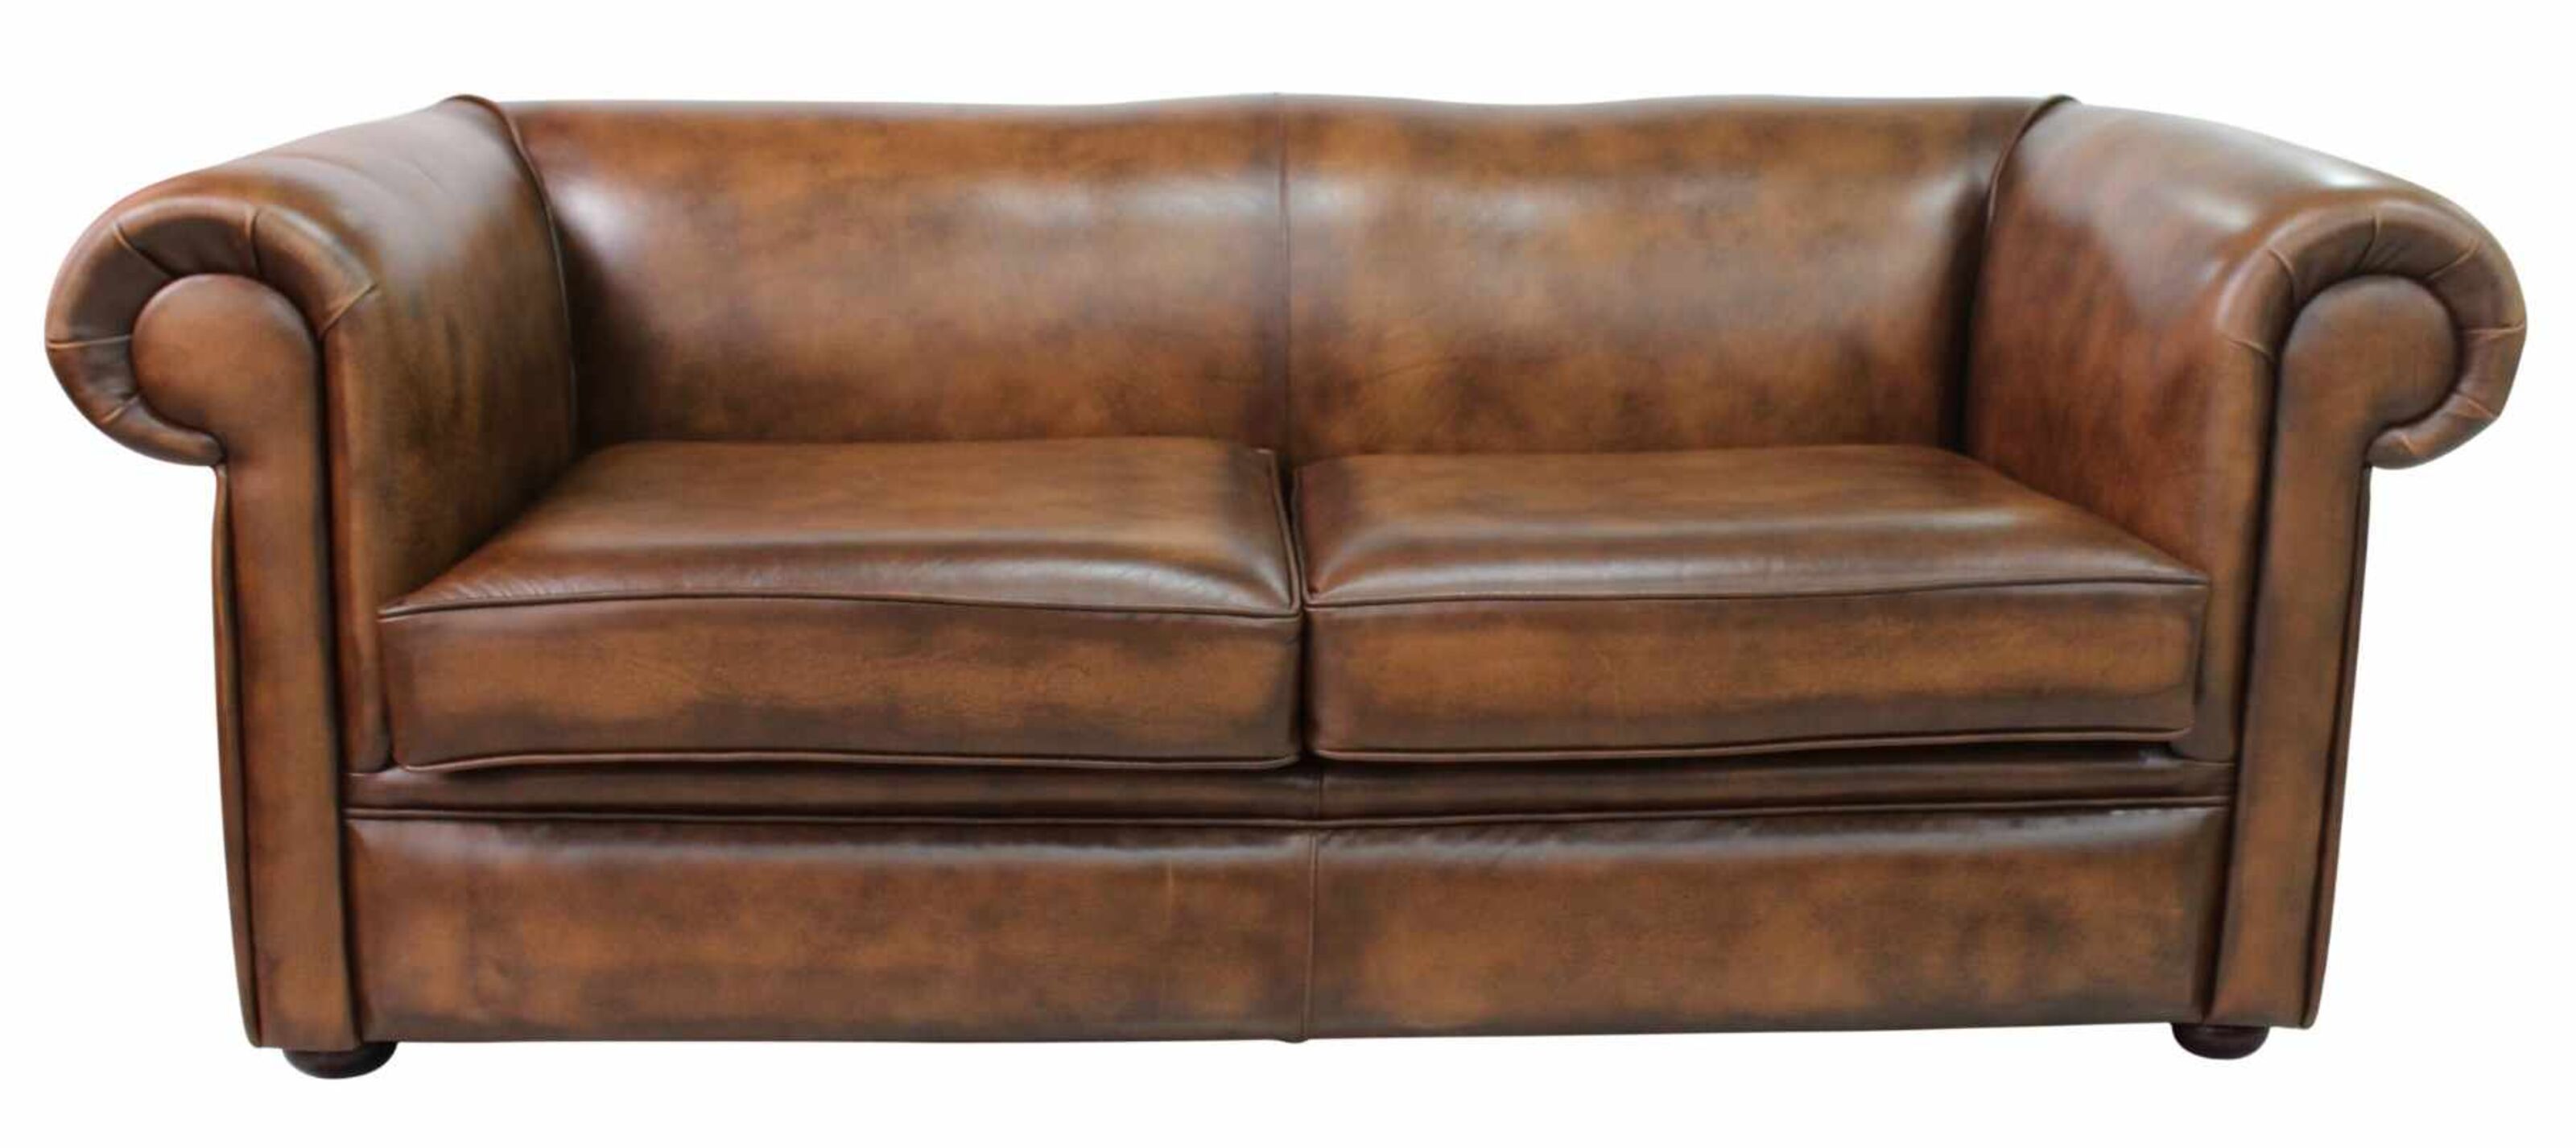 Elegant Offerings Explore Available Chesterfield Furniture for Purchase  %Post Title